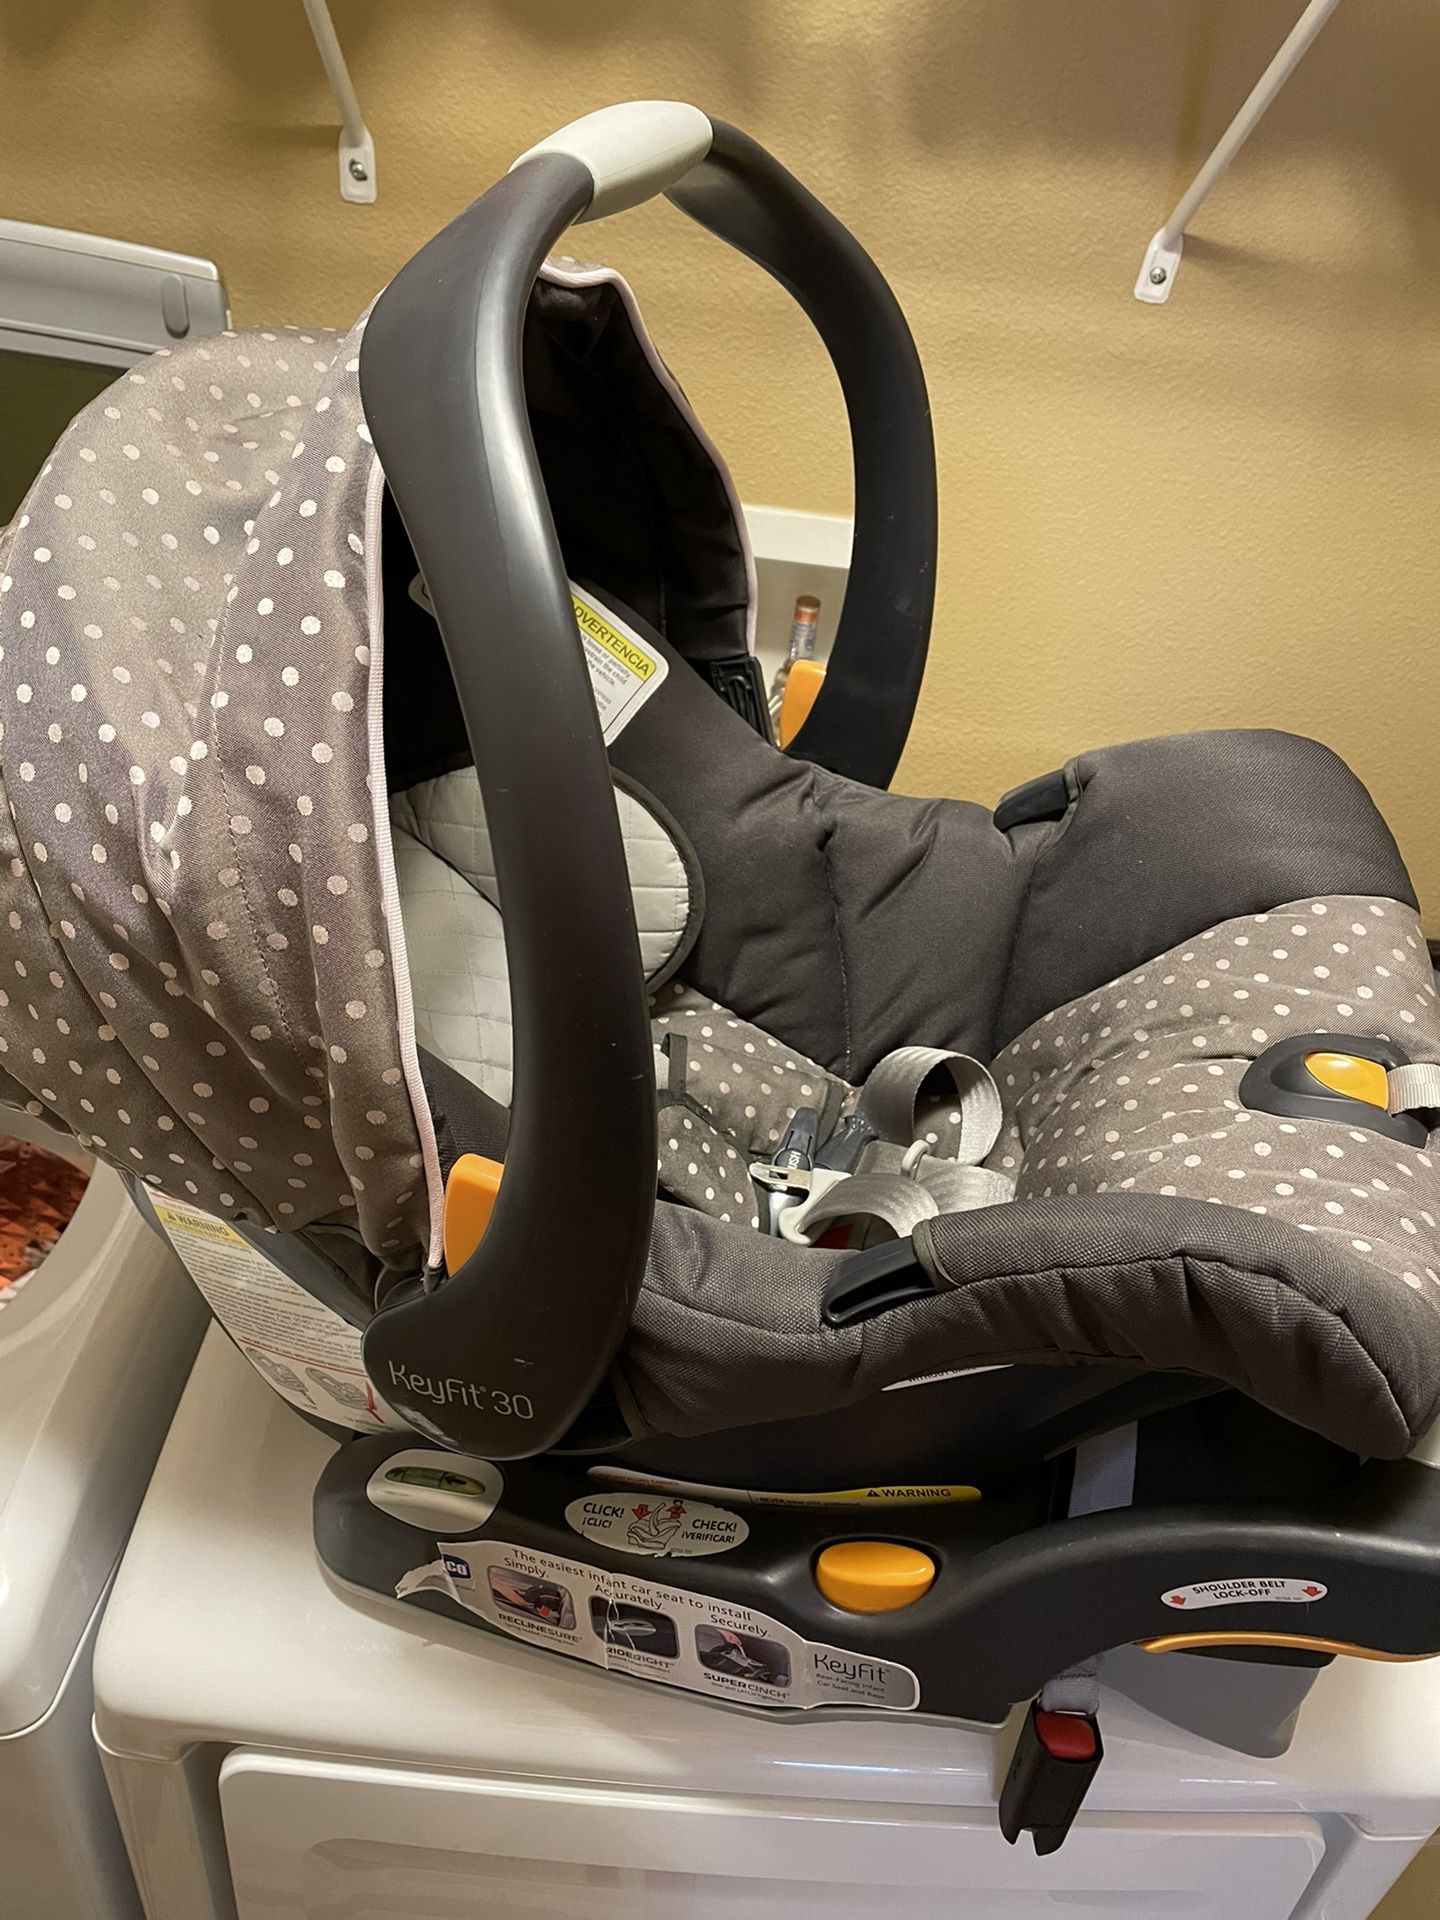 Detachable Infant Car Seat With Two Bases Up To 30lb. Great deal Great Condition!